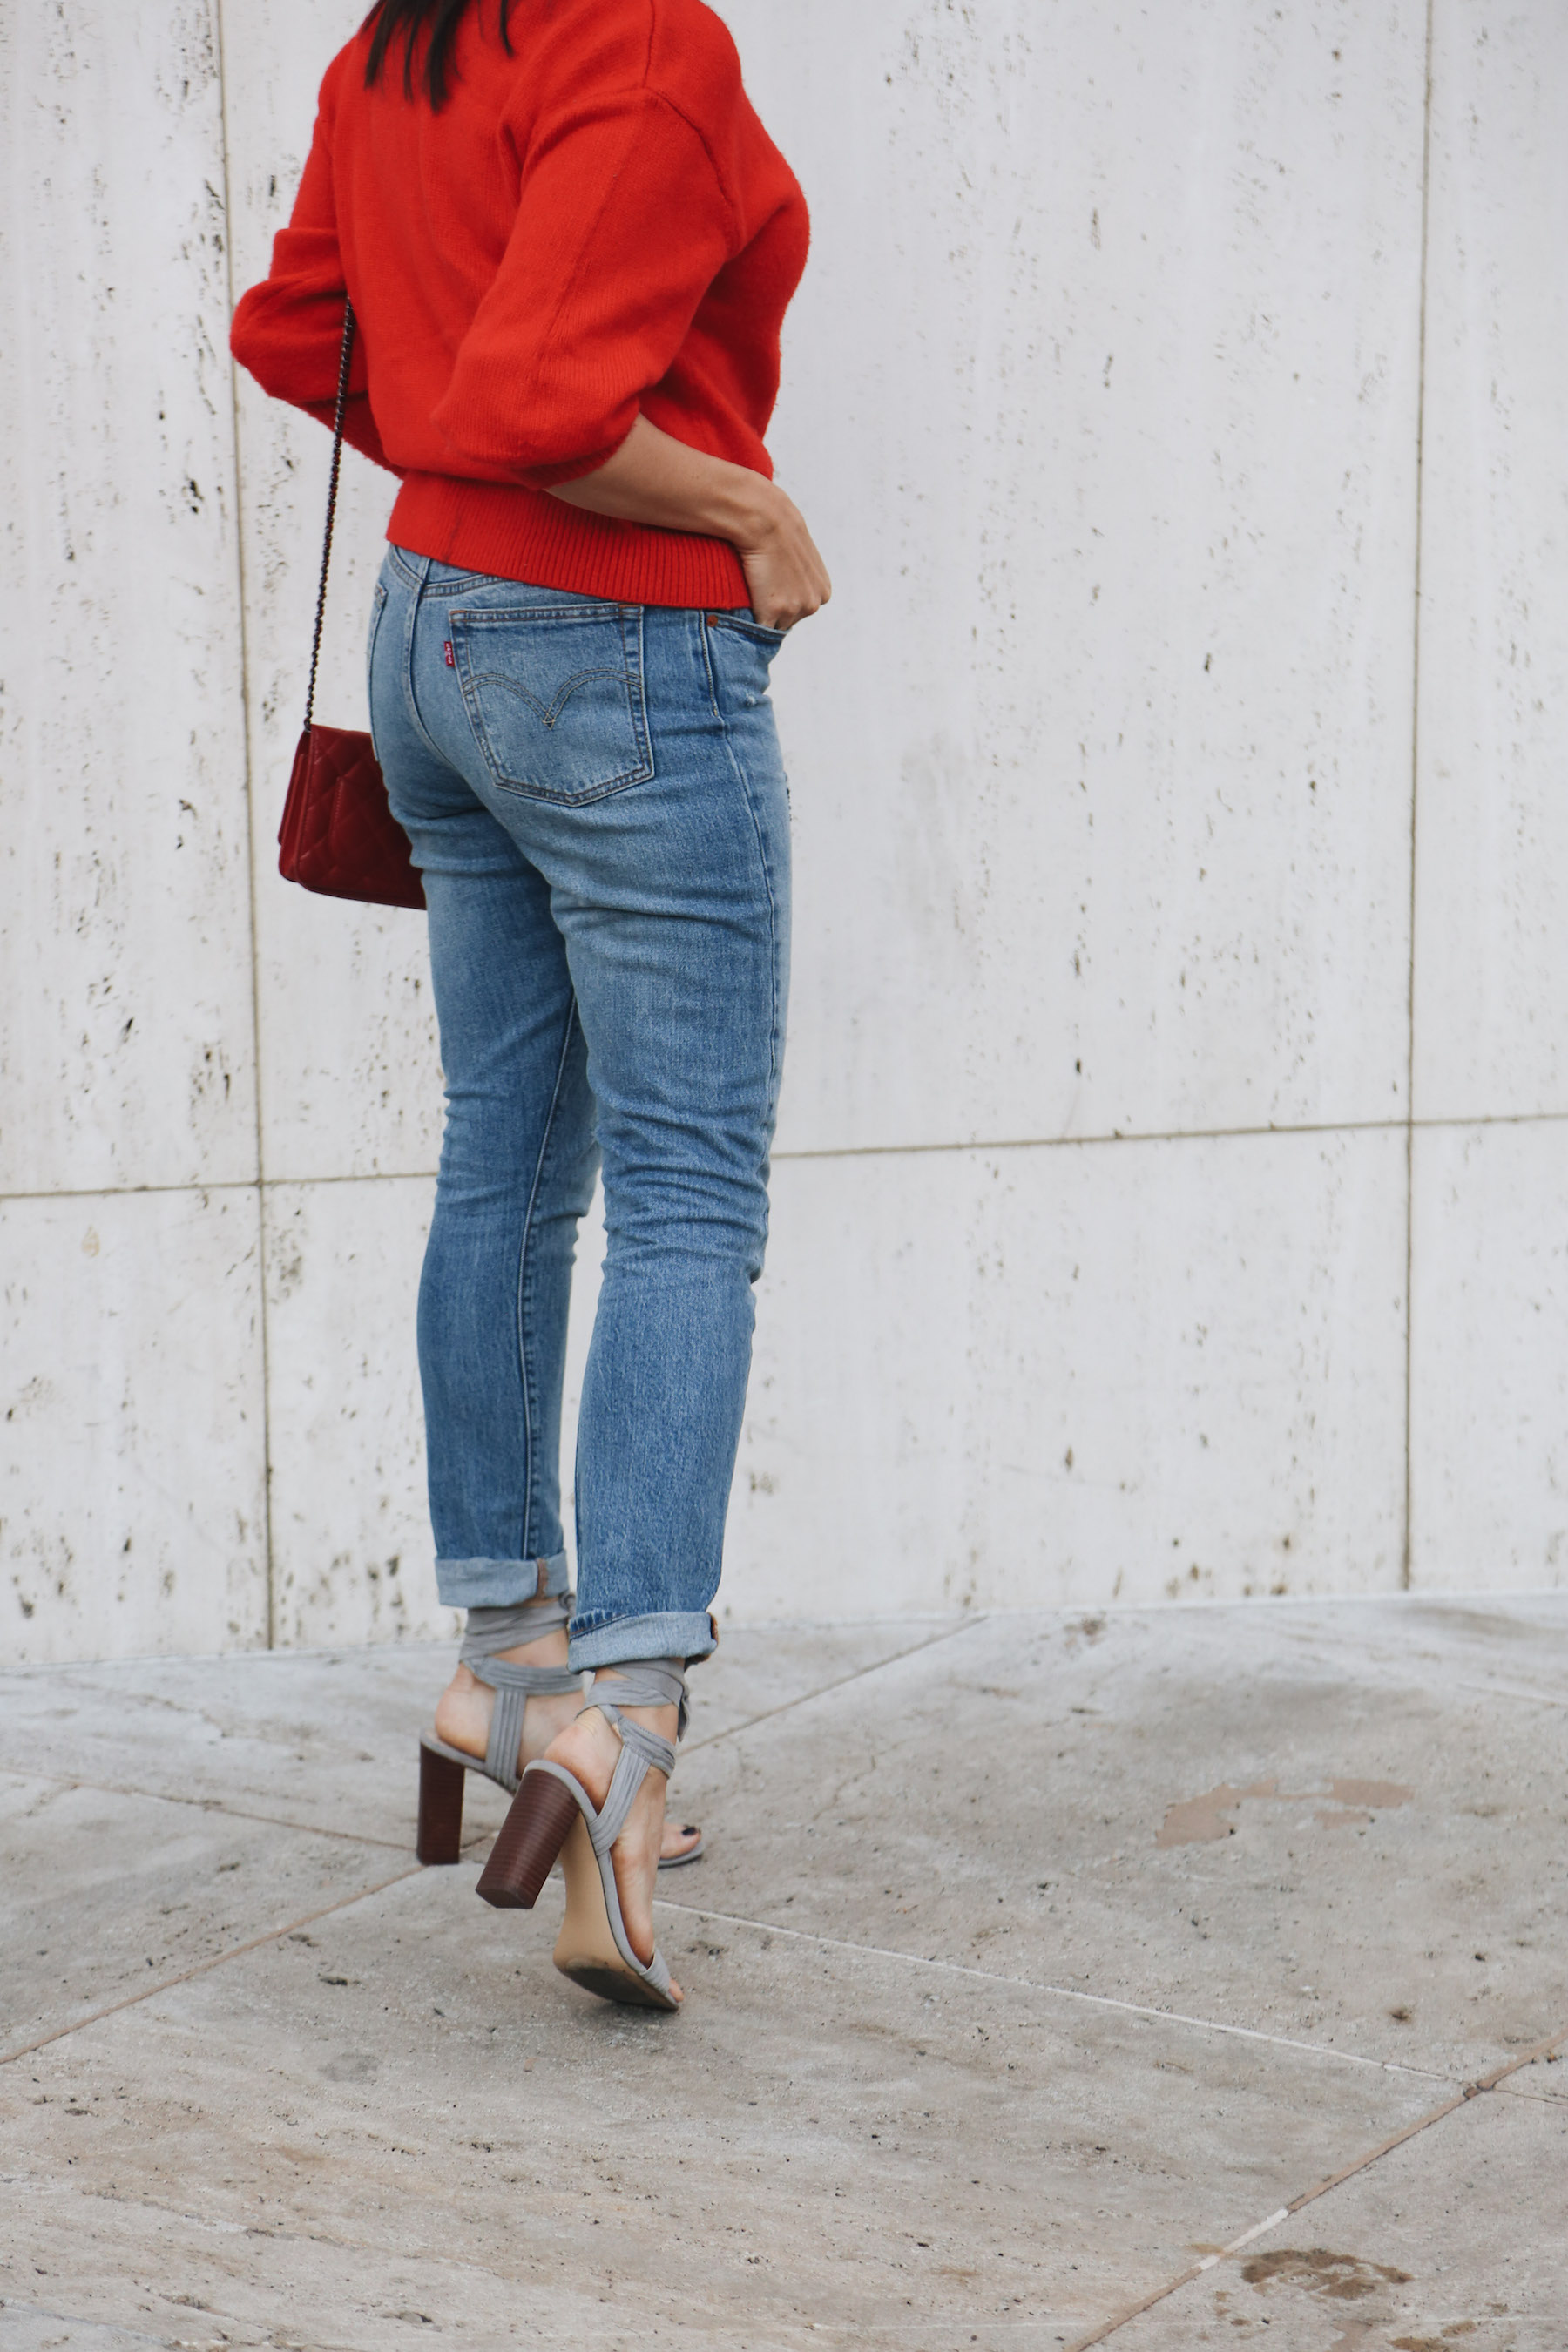 Light Blue Pants with Red Sweater Outfits For Women (20 ideas & outfits)